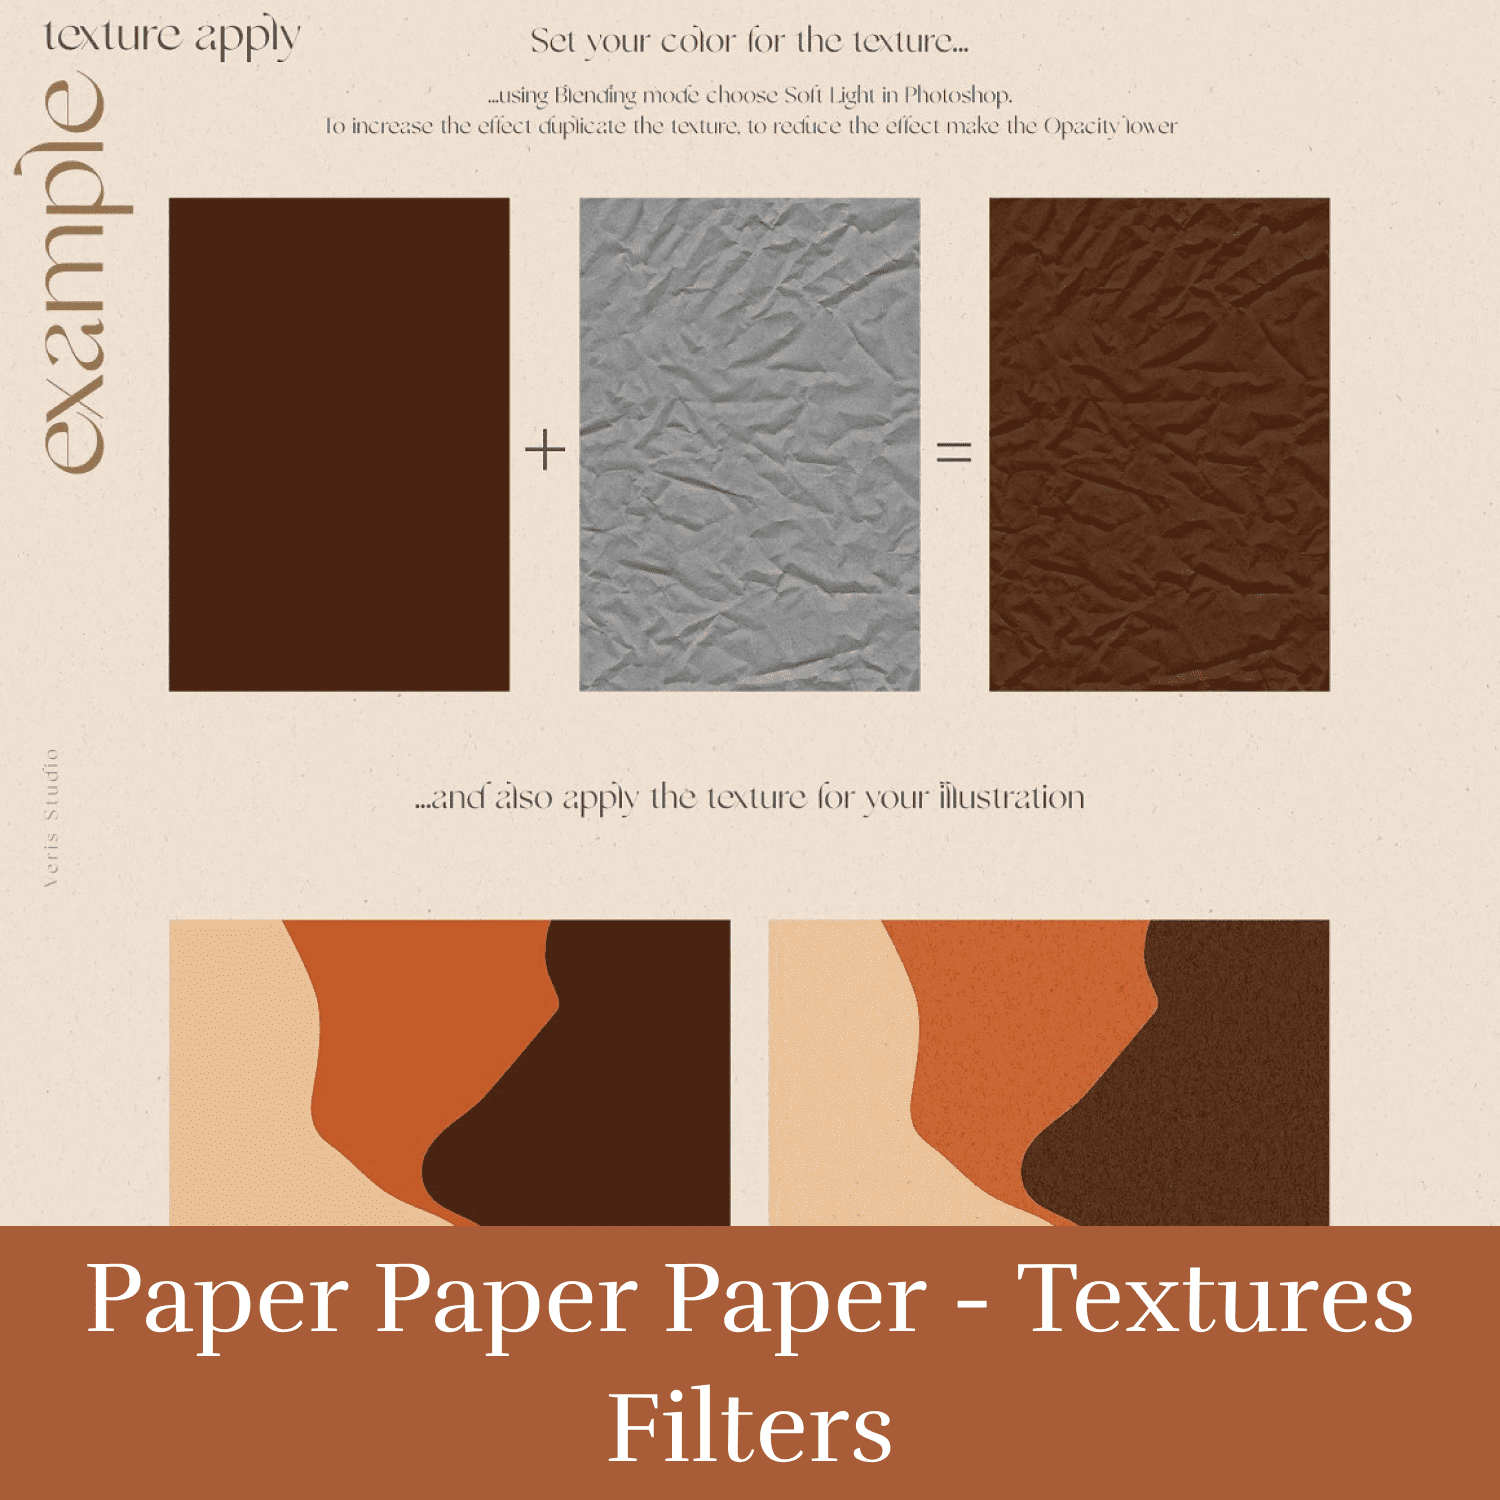 Paper Paper Paper - Textures Filters cover.